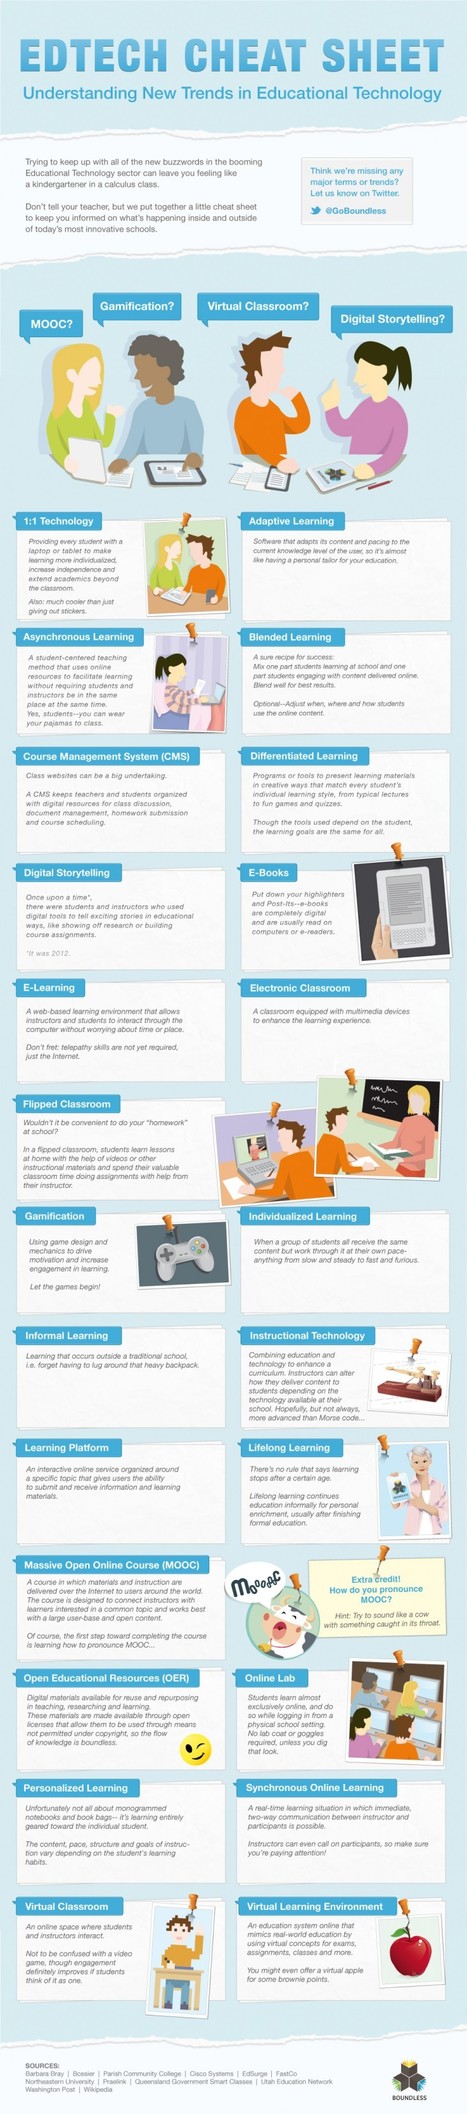 The Must-Have EdTech Cheat Sheet [Infographic] | aprendizaje mixto | Scoop.it